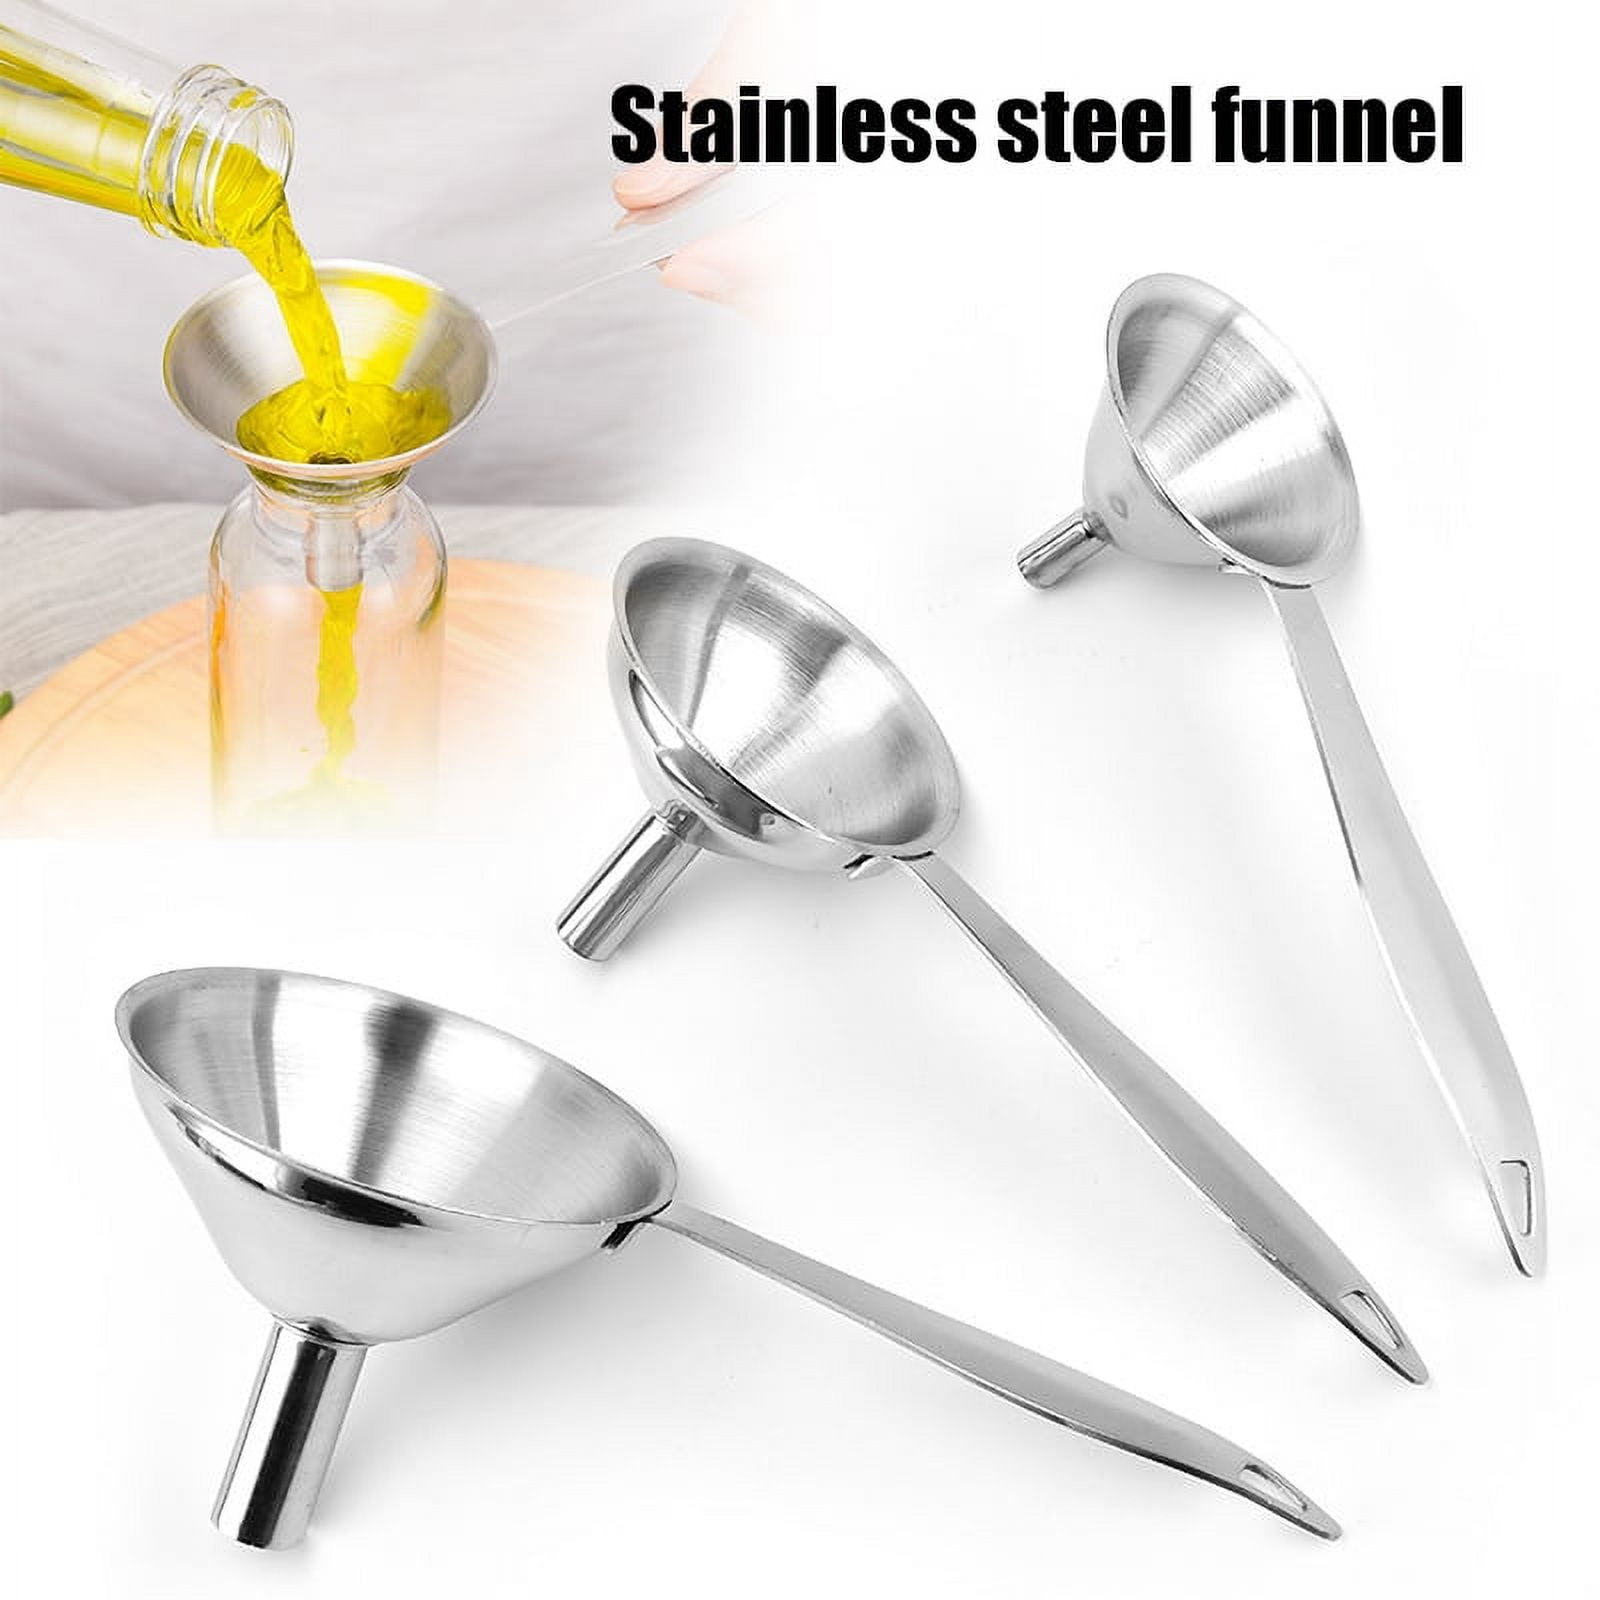 2Pack 3 in 1 Metal Funnels for Filling Bottles Stainless Steel Small  Kitchen Funnel Set for Transferring Essential Oils Liquid Fluid Spice Dry  Ingredients Powder, Durable and Dishwash Safe 